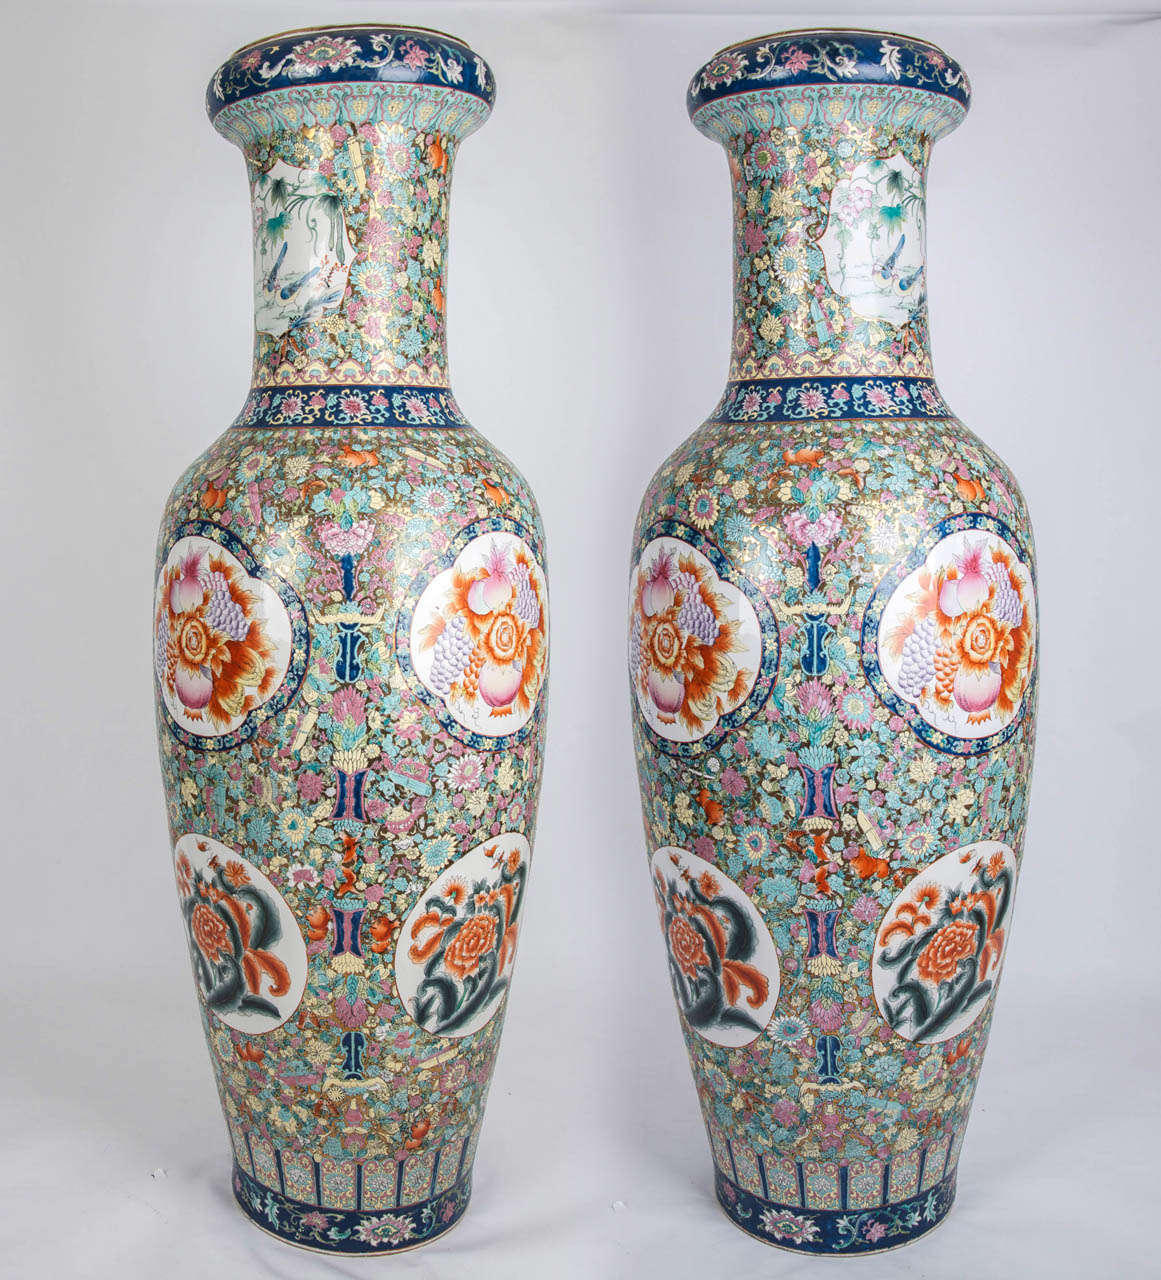 Modern Large Chinese Vases For The Floor Creative Design Ideas intended for dimensions 1161 X 1280